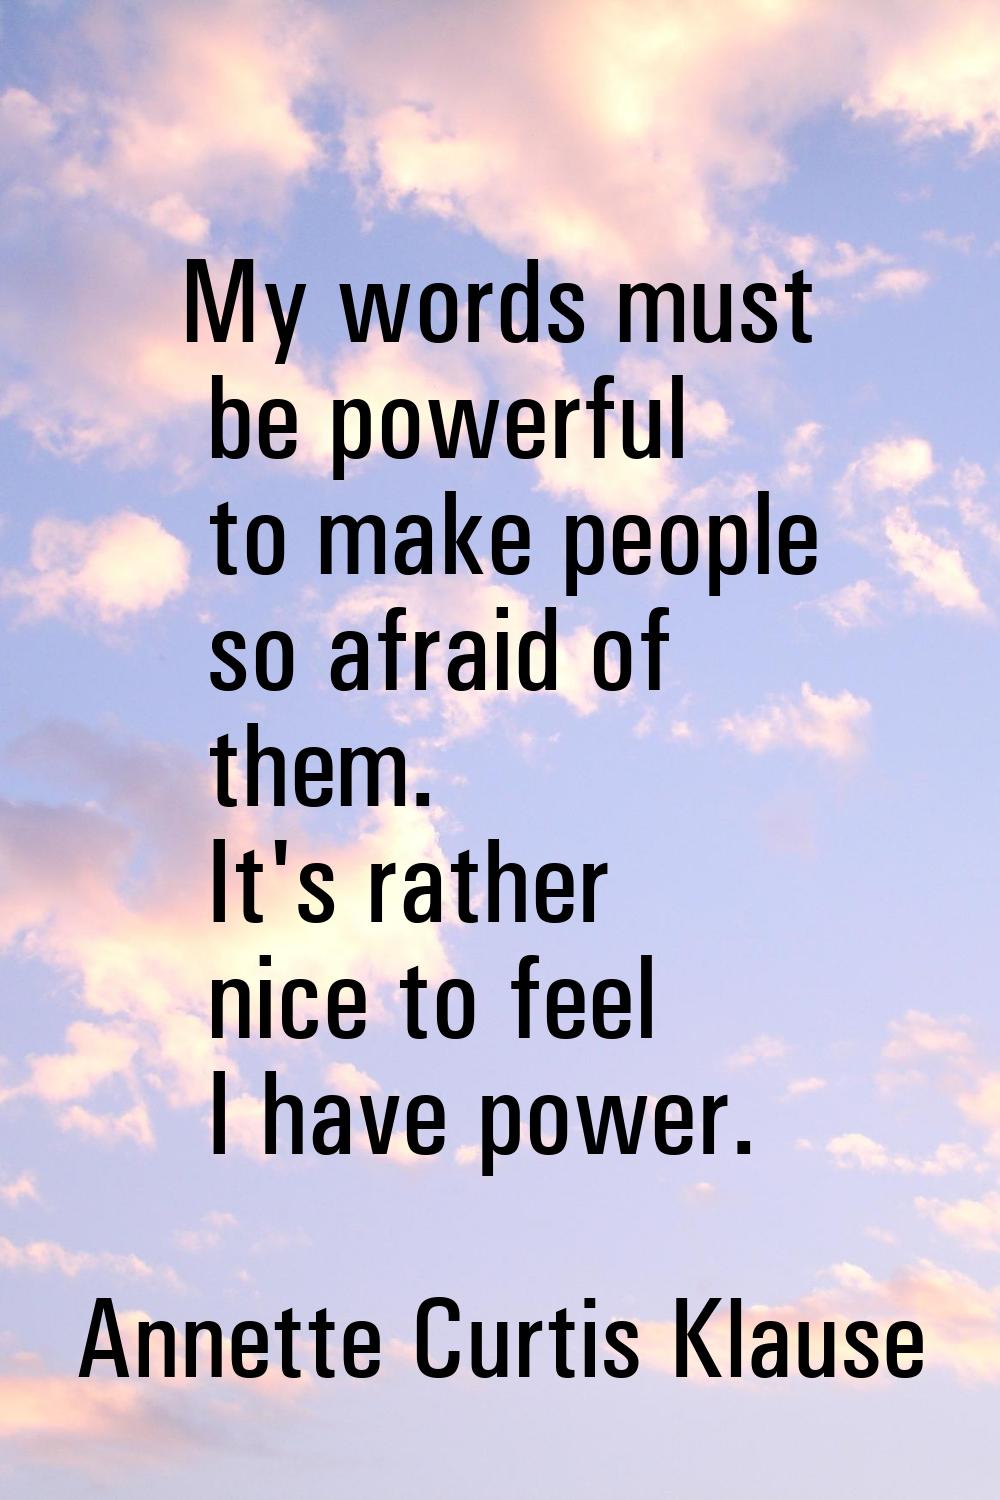 My words must be powerful to make people so afraid of them. It's rather nice to feel I have power.